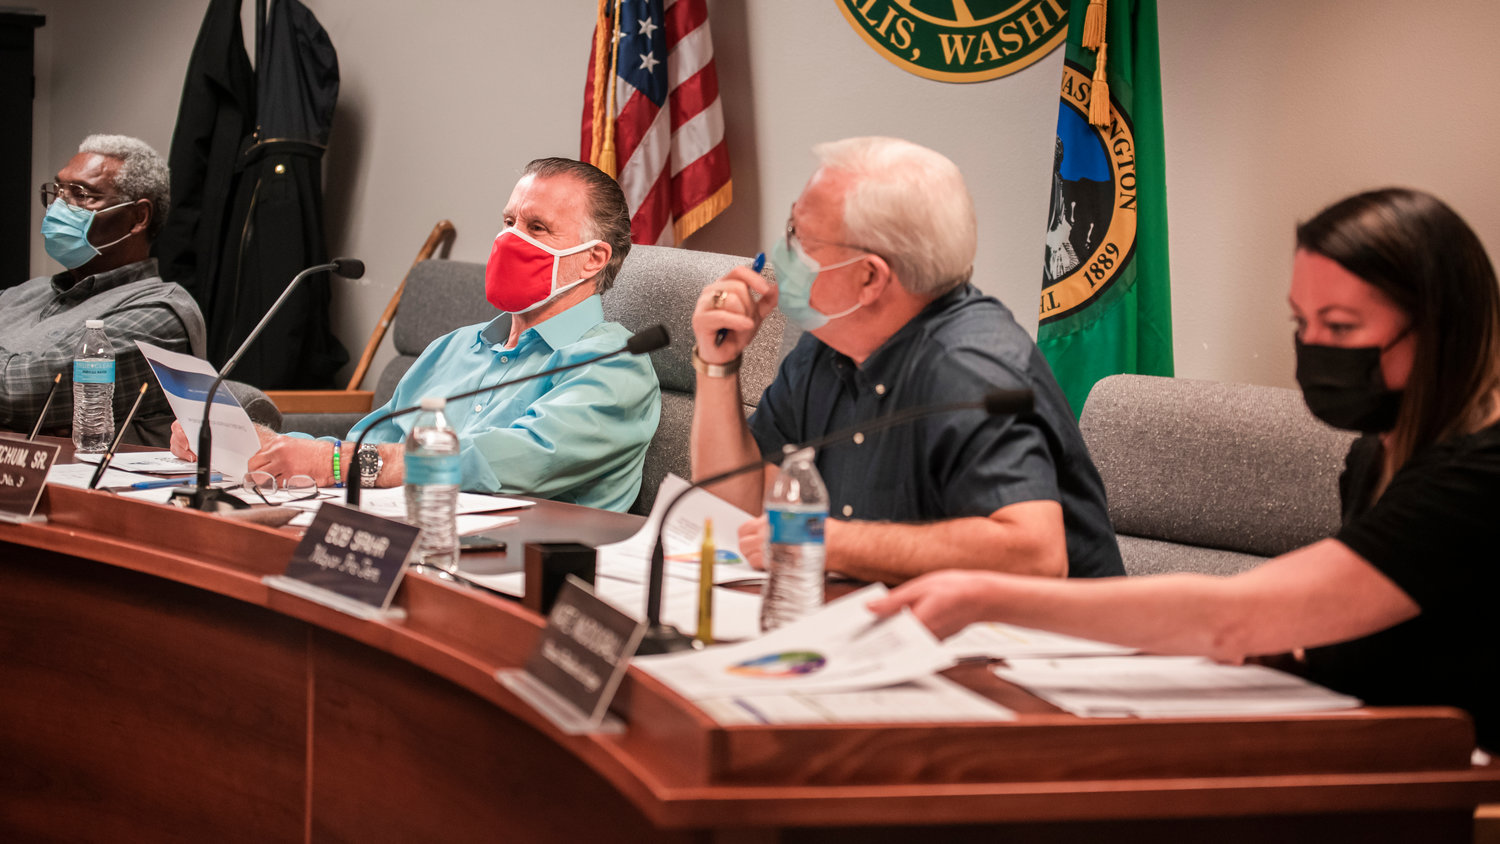 Chehalis City Council members listen to speakers during a public meeting Monday evening.